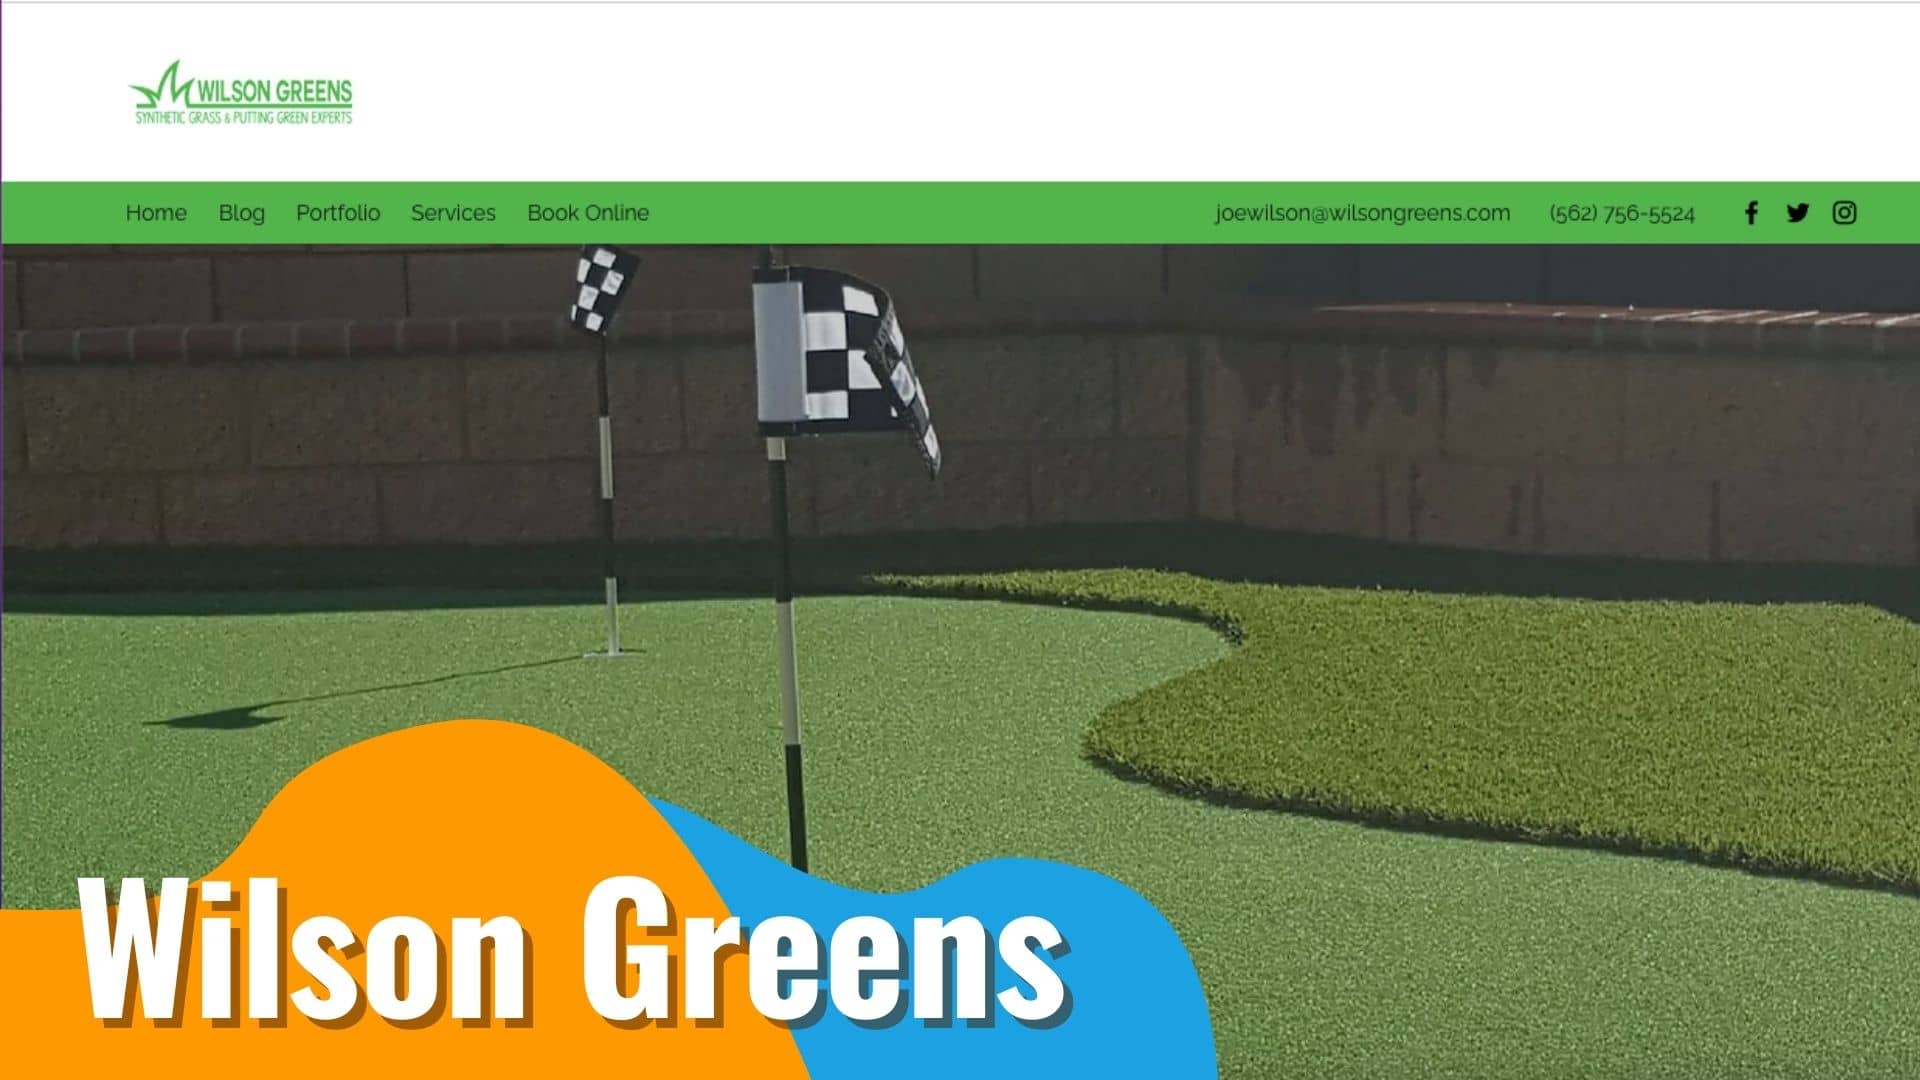 Wilson Greens Synthetic Grass and Putting Green Experts Huntington Beach